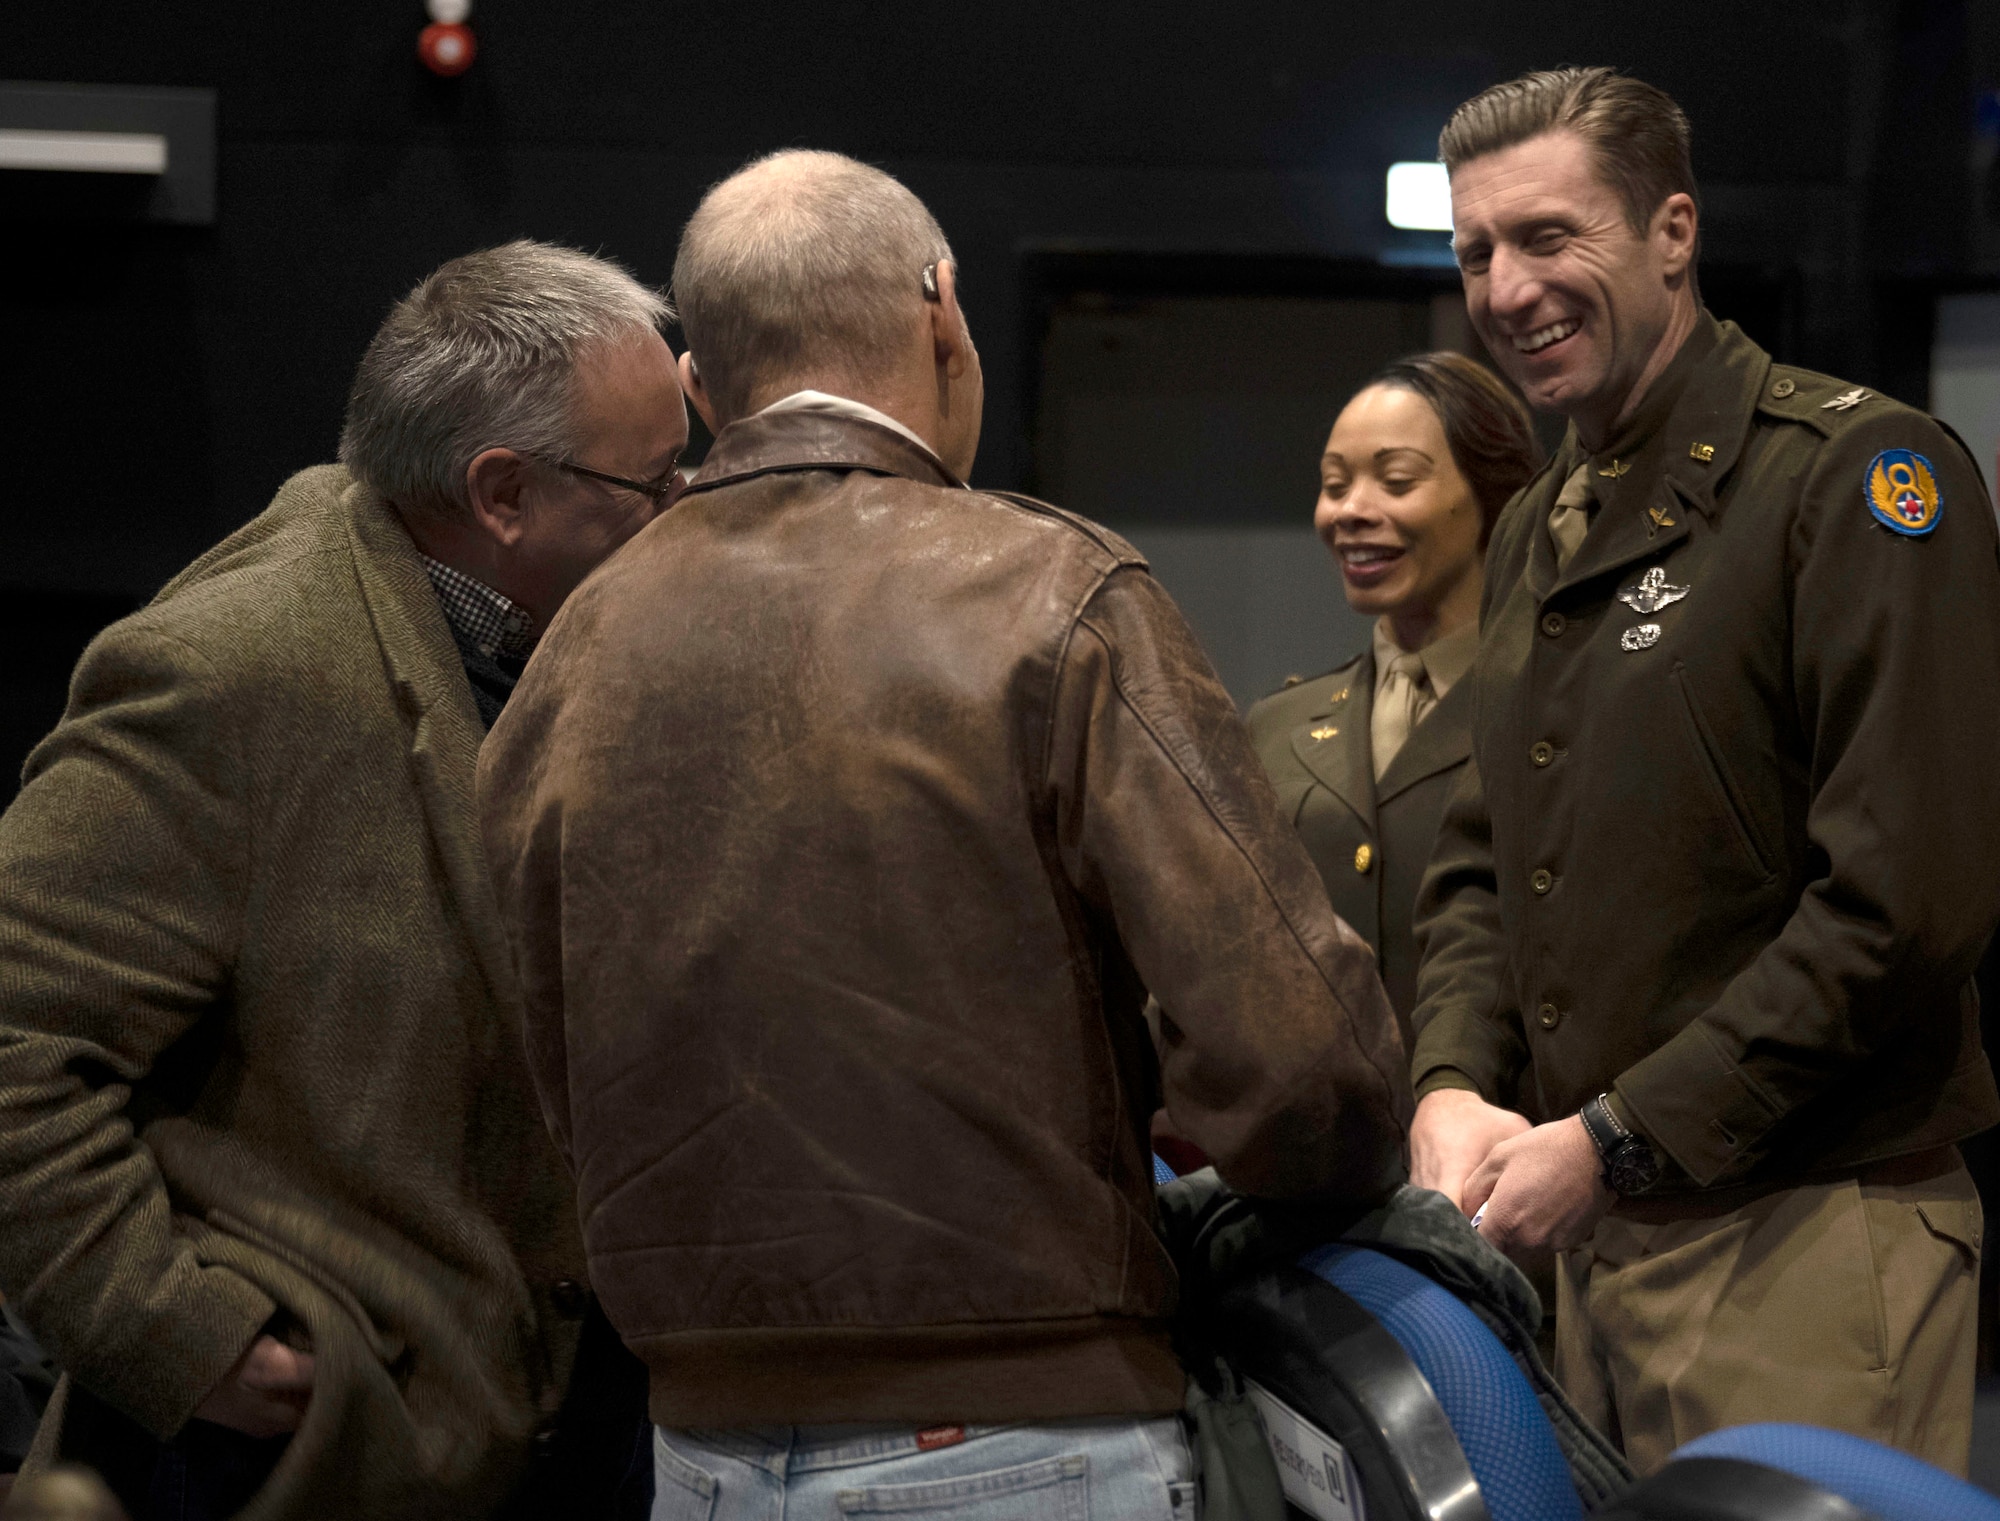 U.S. Air Force Col. Ryan Garlow, right, 100th Air Refueling Wing commander, and Chief Master Sgt. Tiffany Griego, second right, 100th ARW command chief, wear authentic World War II uniforms as they chat with invited guests before the start of the premiere of episode one of the upcoming “Masters of the Air” miniseries at Royal Air Force Mildenhall, England, Jan. 19, 2024. The upcoming nine-part series on Apple TV+ highlights the legacy of the Eighth Air Force and 100th Bomb Group at Thorpe Abbotts, England, to which the 100th ARW has direct ties. (U.S. Air Force photo by Senior Airman Alvaro Villagomez)